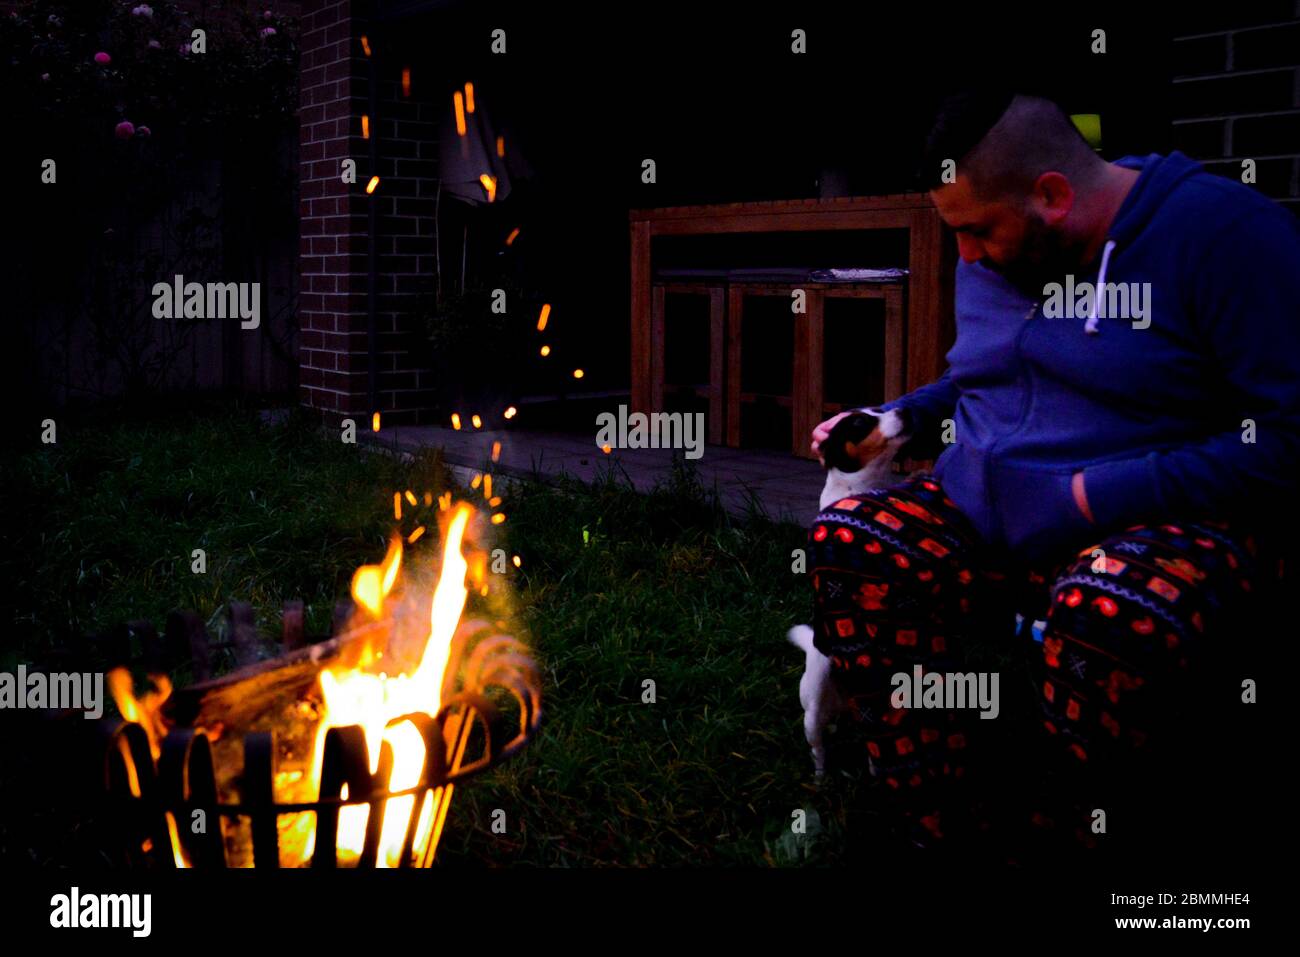 Man Patting Dog Sitting in Backyard in Front of Fire Pit in Dark Stock Photo